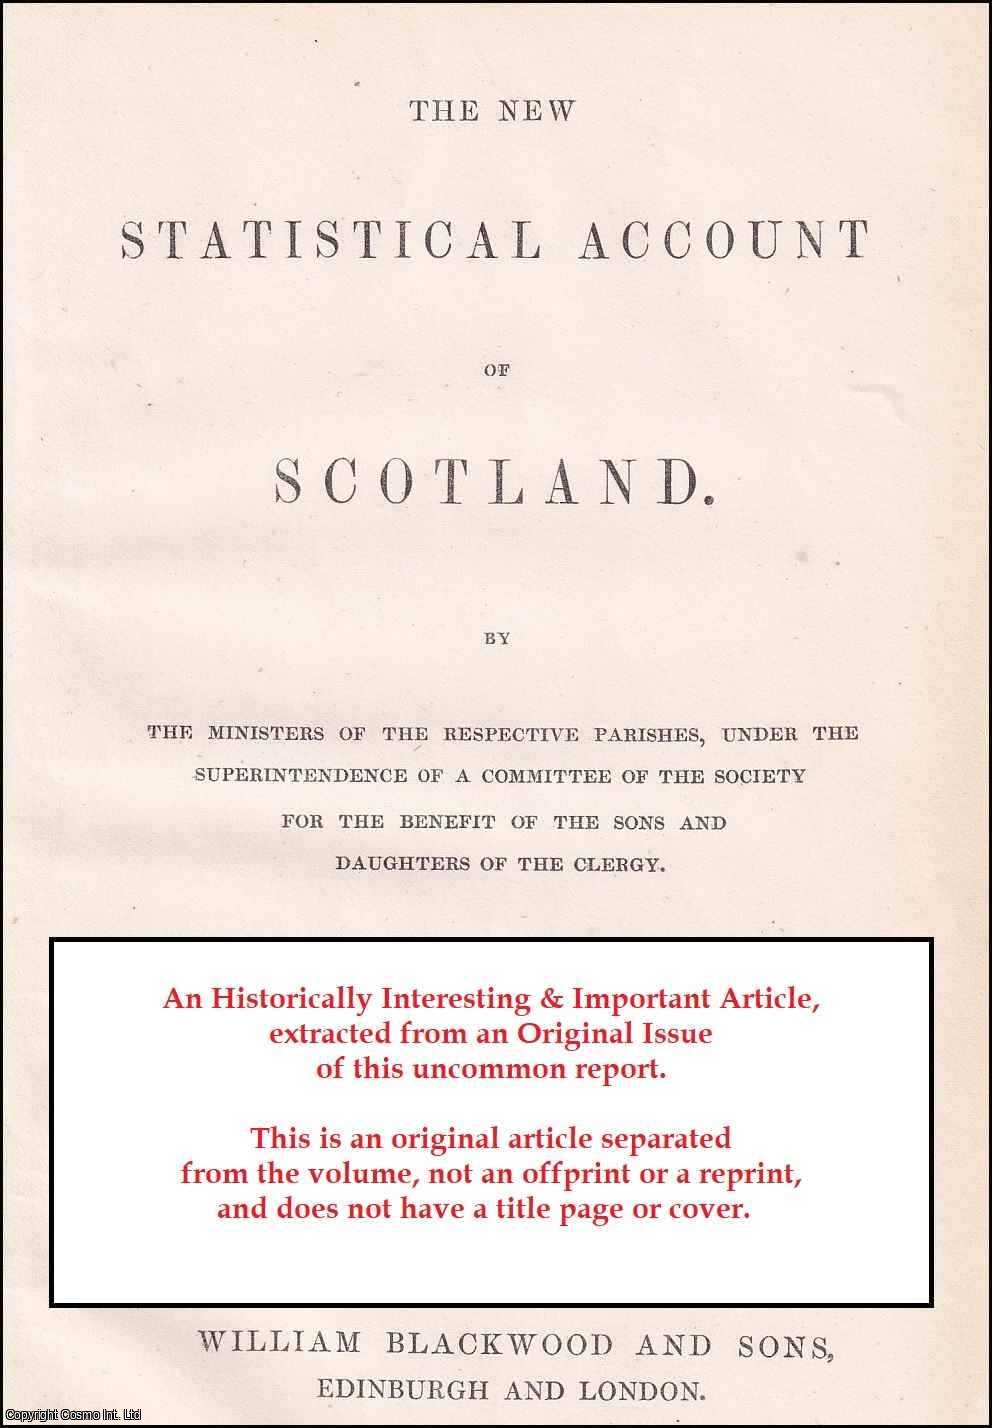 Rev. John Macdonald - United Parishes of Urquhart and Loggie-Wester. Presbytery of Dingwall, Synod of Ross. An uncommon original article from The New Statistical Account of Scotland, 1845.